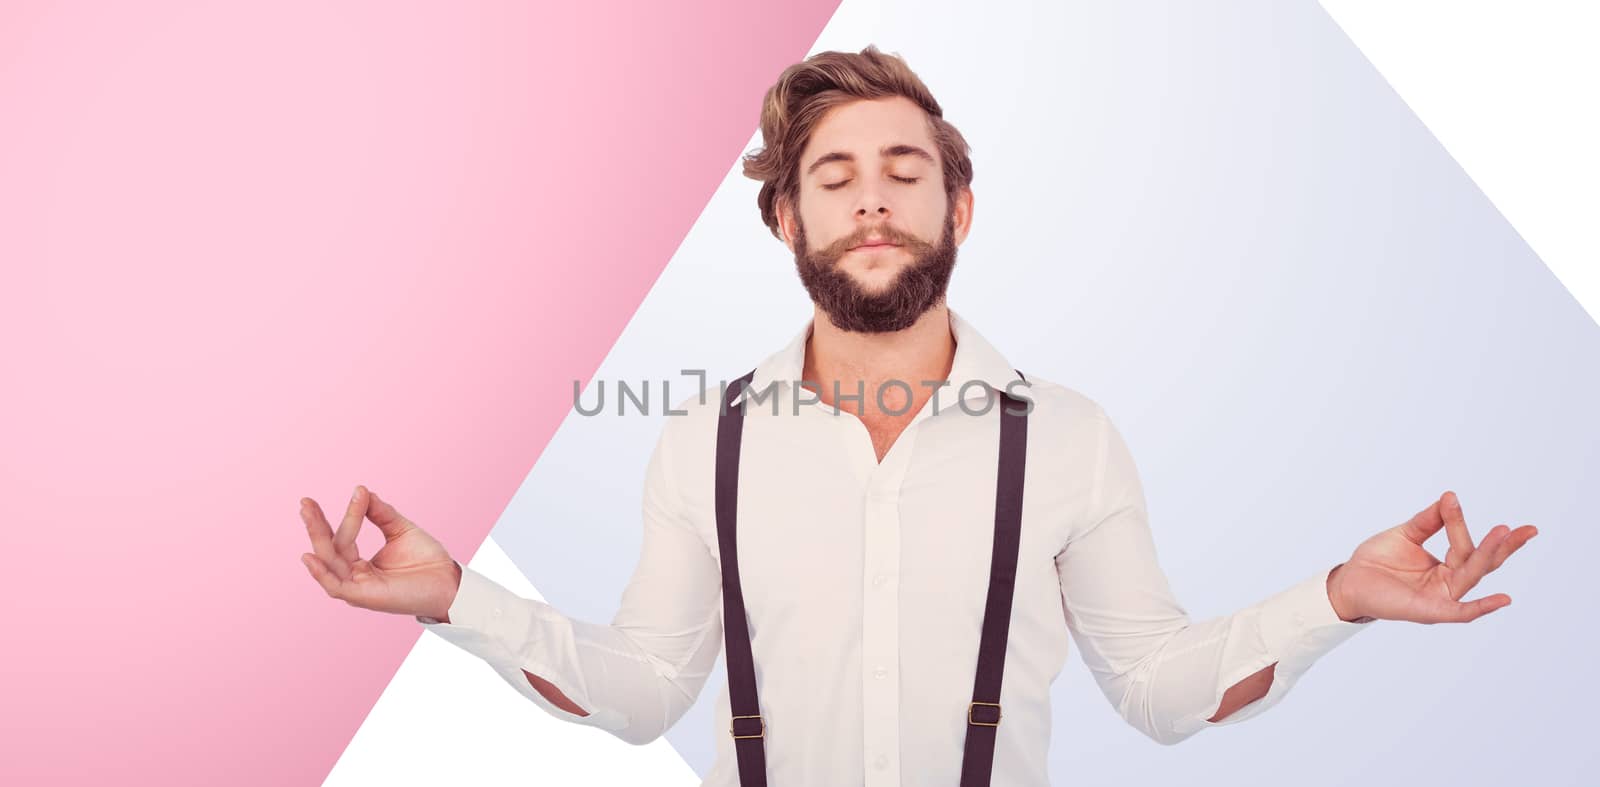 Hipster meditating arms outstretched against pink background